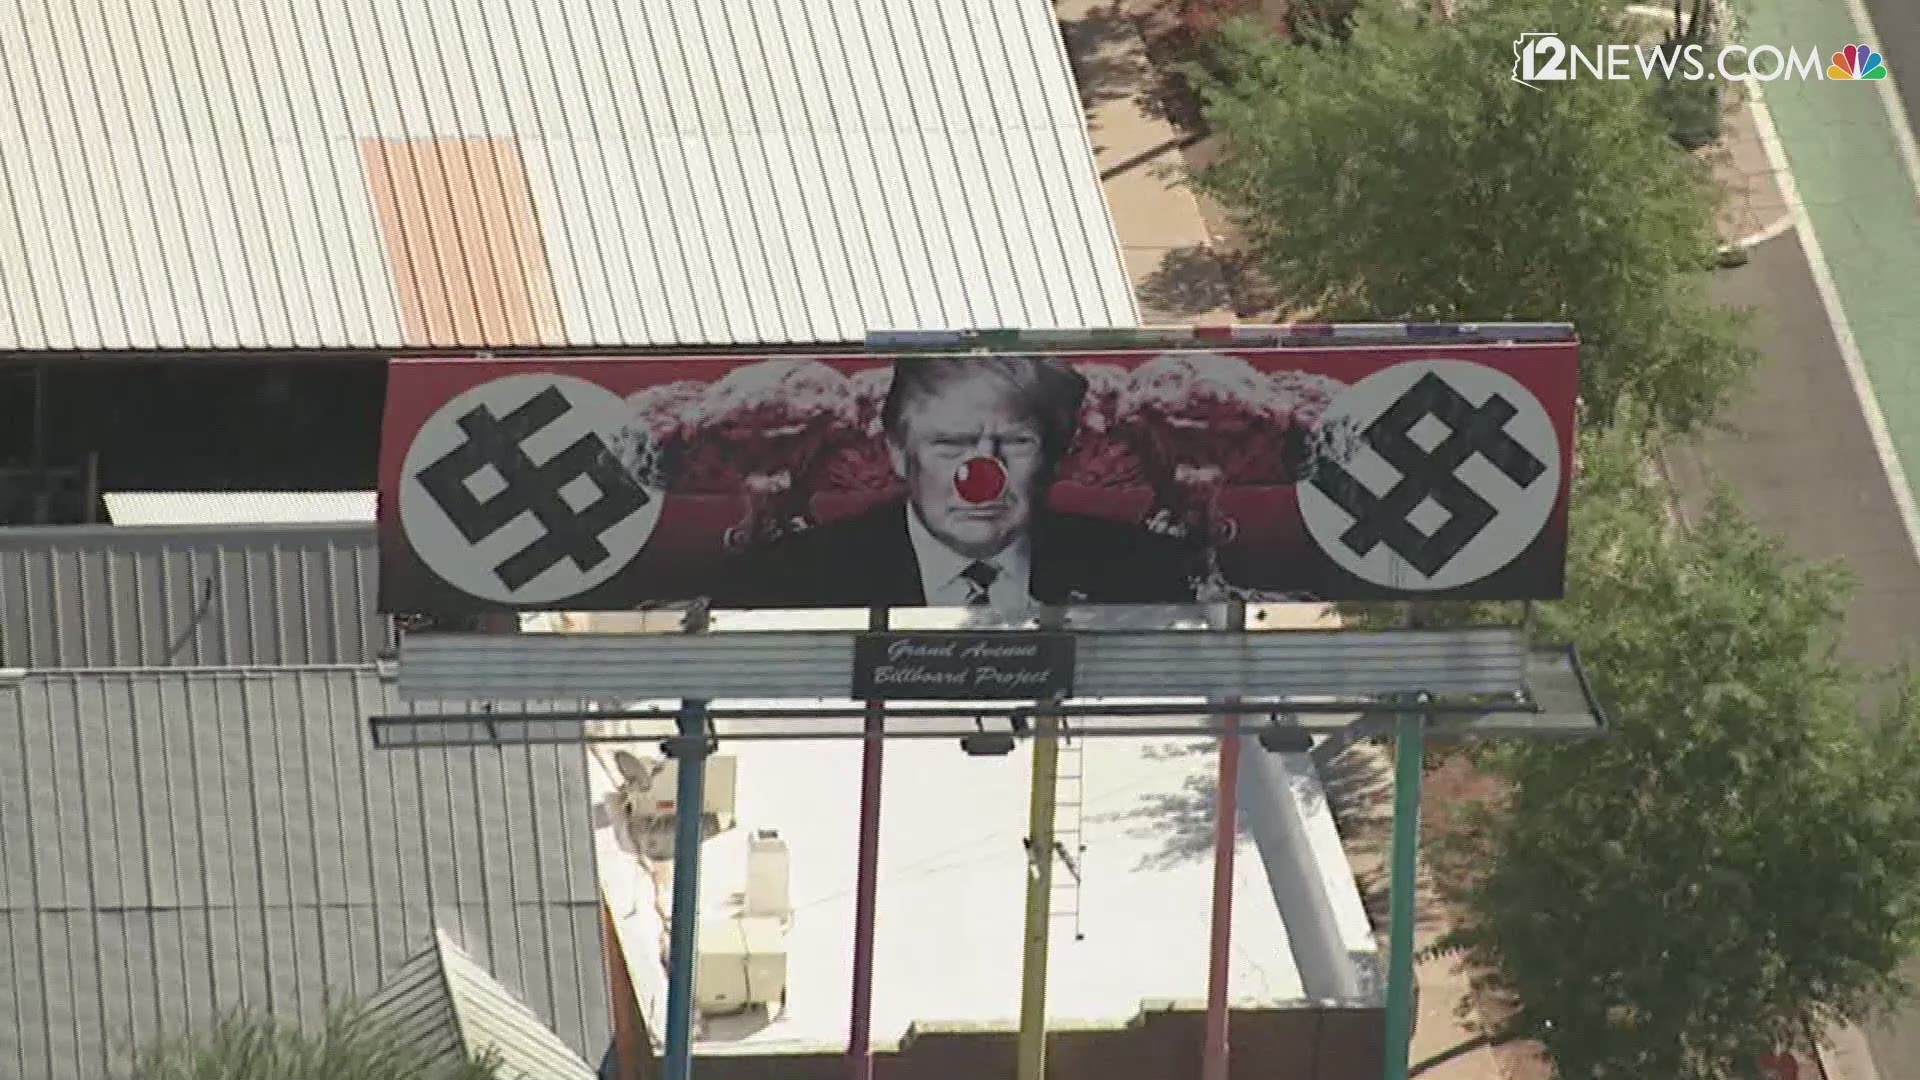 It appears that a red clown nose was recently added to a billboard depicting President Donald Trump. The billboard is located at Grand and 11th avenues in Phoenix.